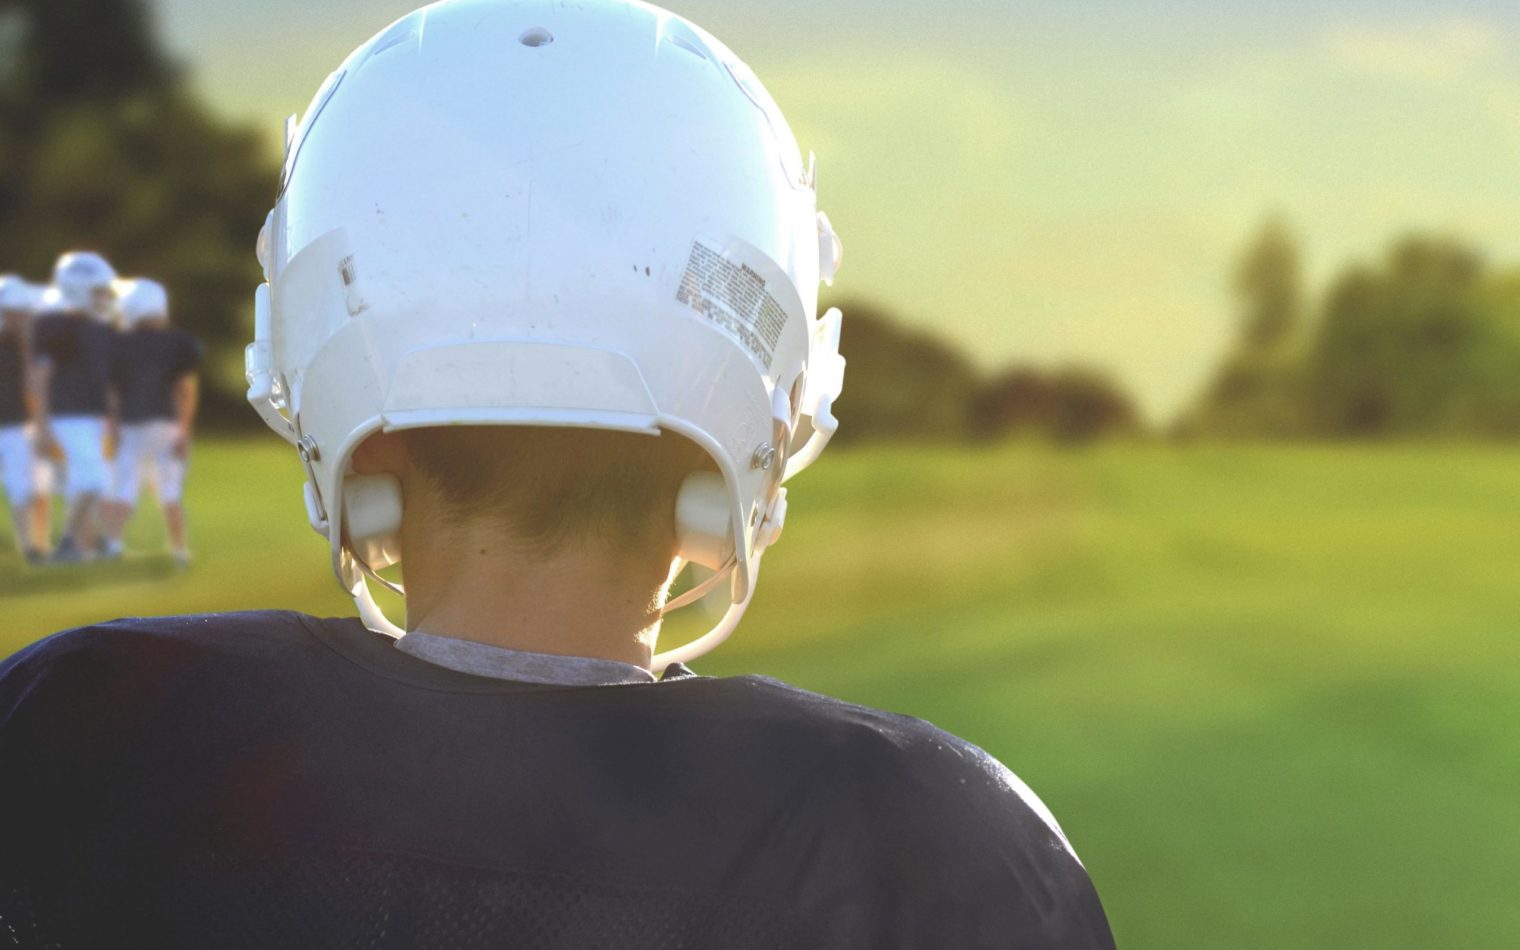 It’s all in the head: 6 Steps to detect and care for your child’s concussions